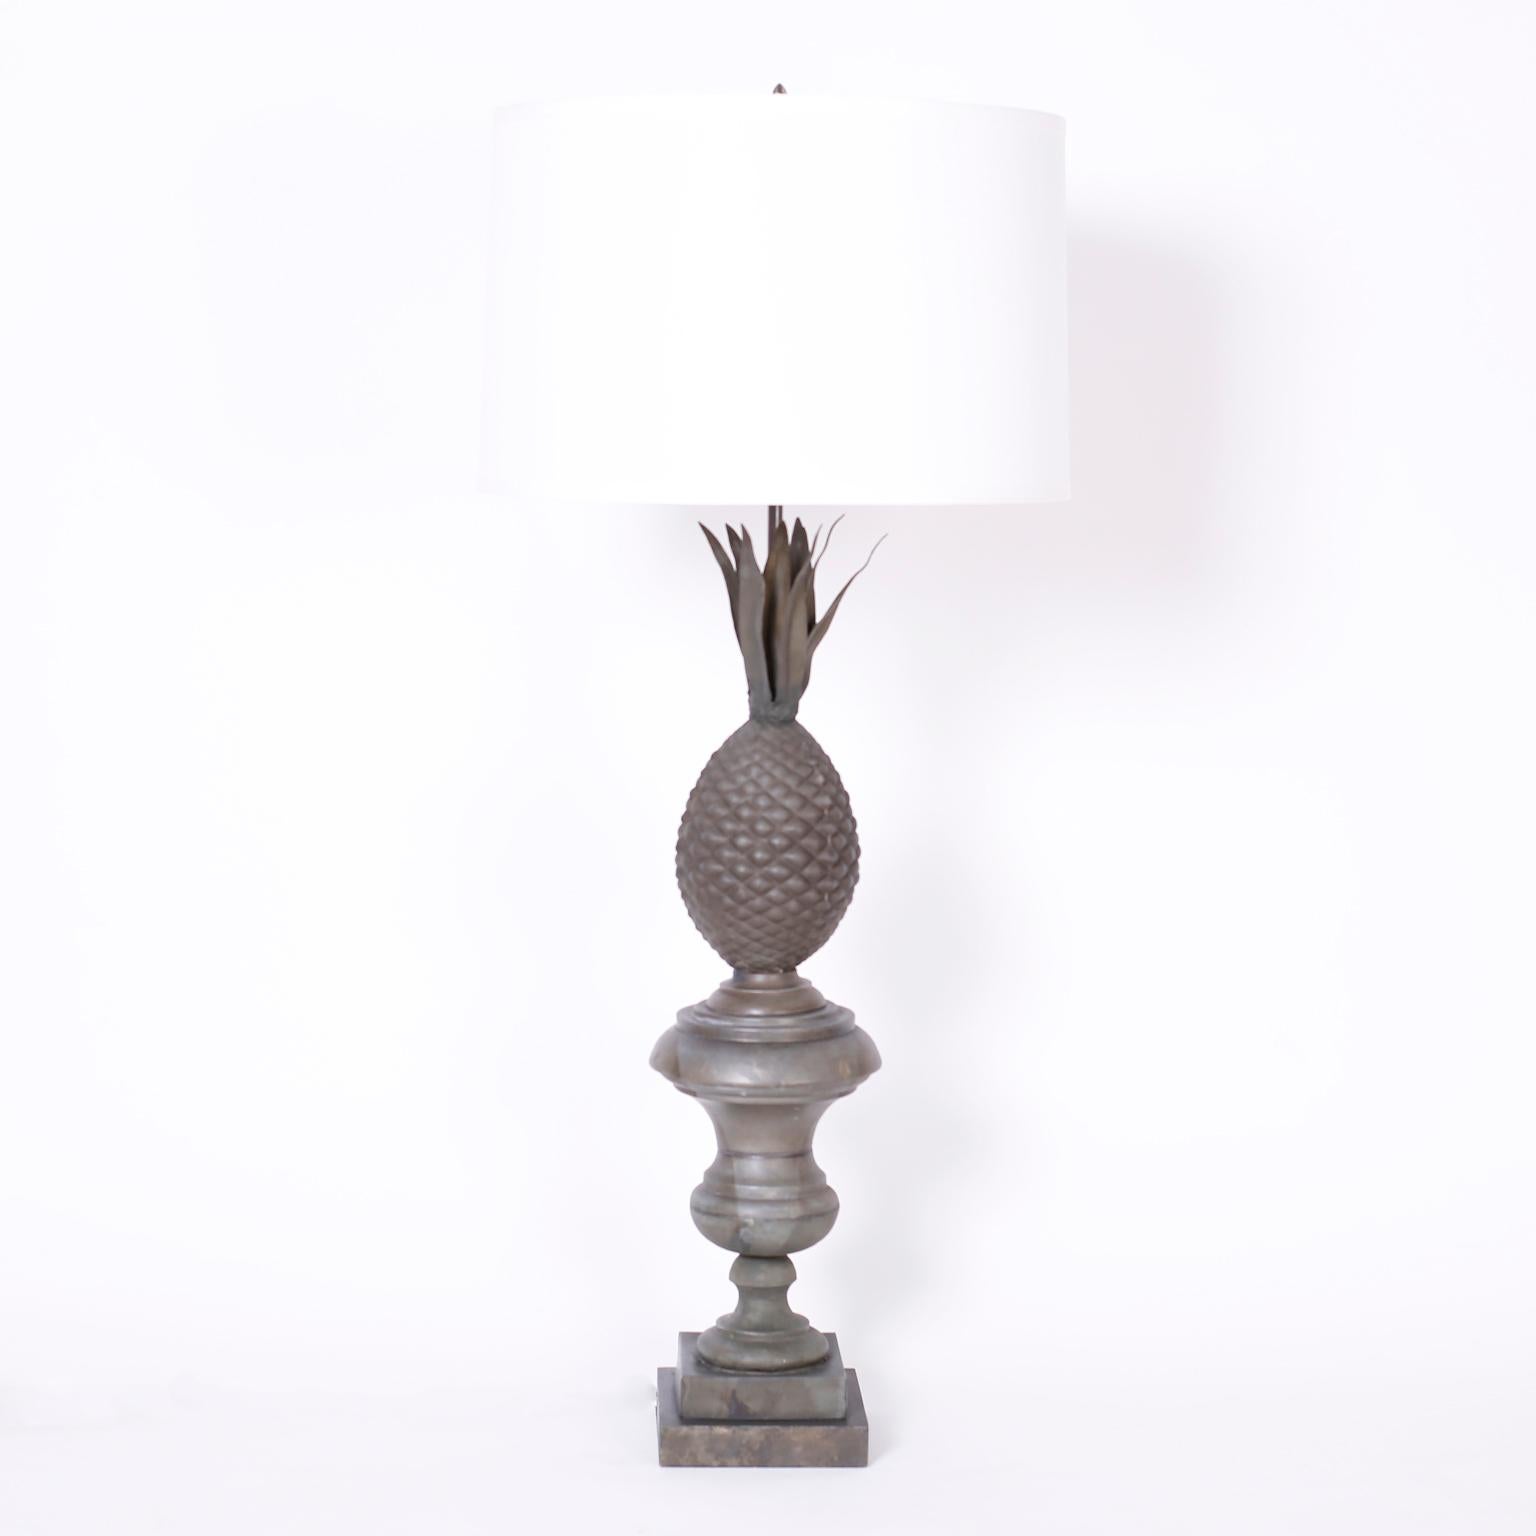 Antique pair of French table lamps crafted in zinc with a pineapple motif and a classical urn form on a double plinth base.